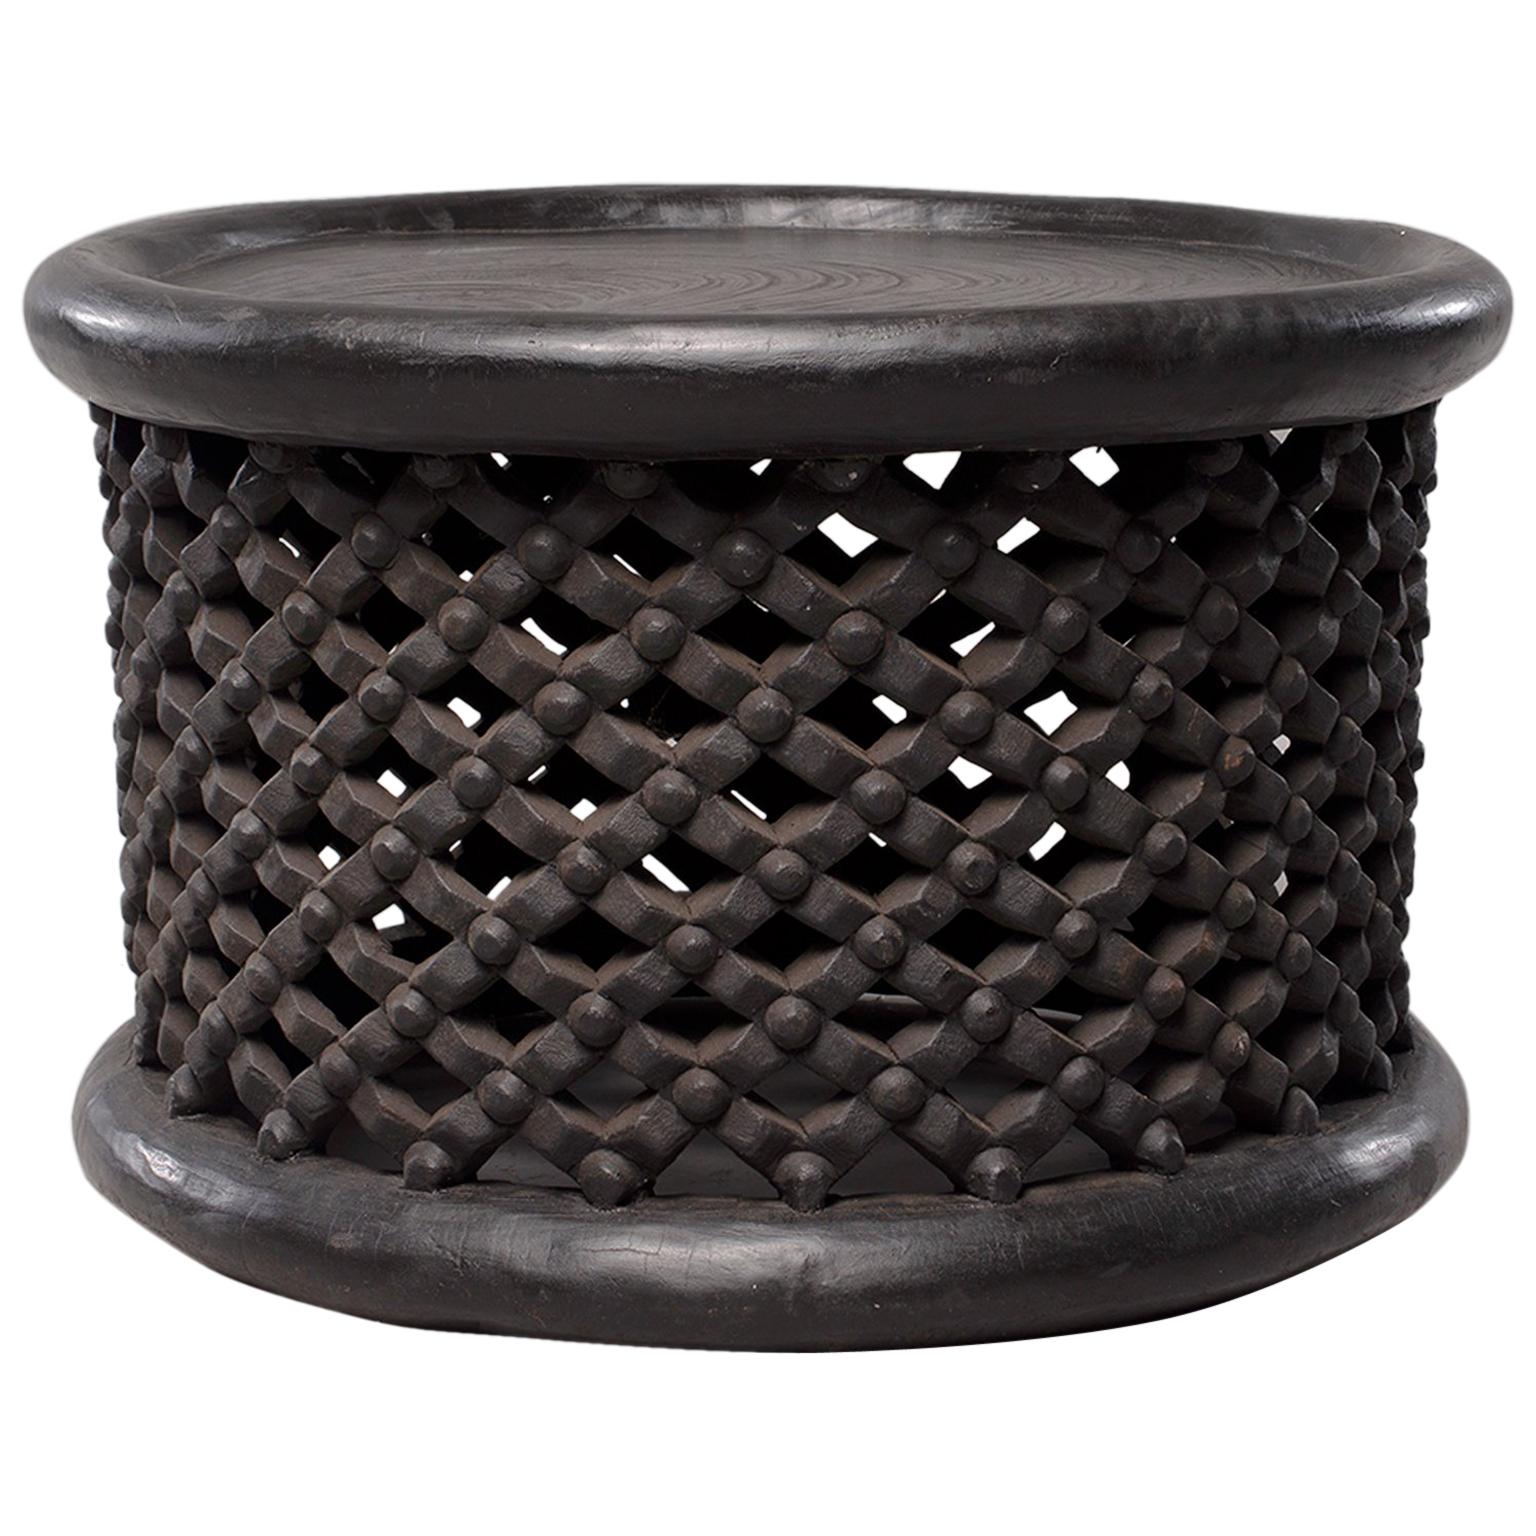 African Bamileke Carved Wood Table or Stool